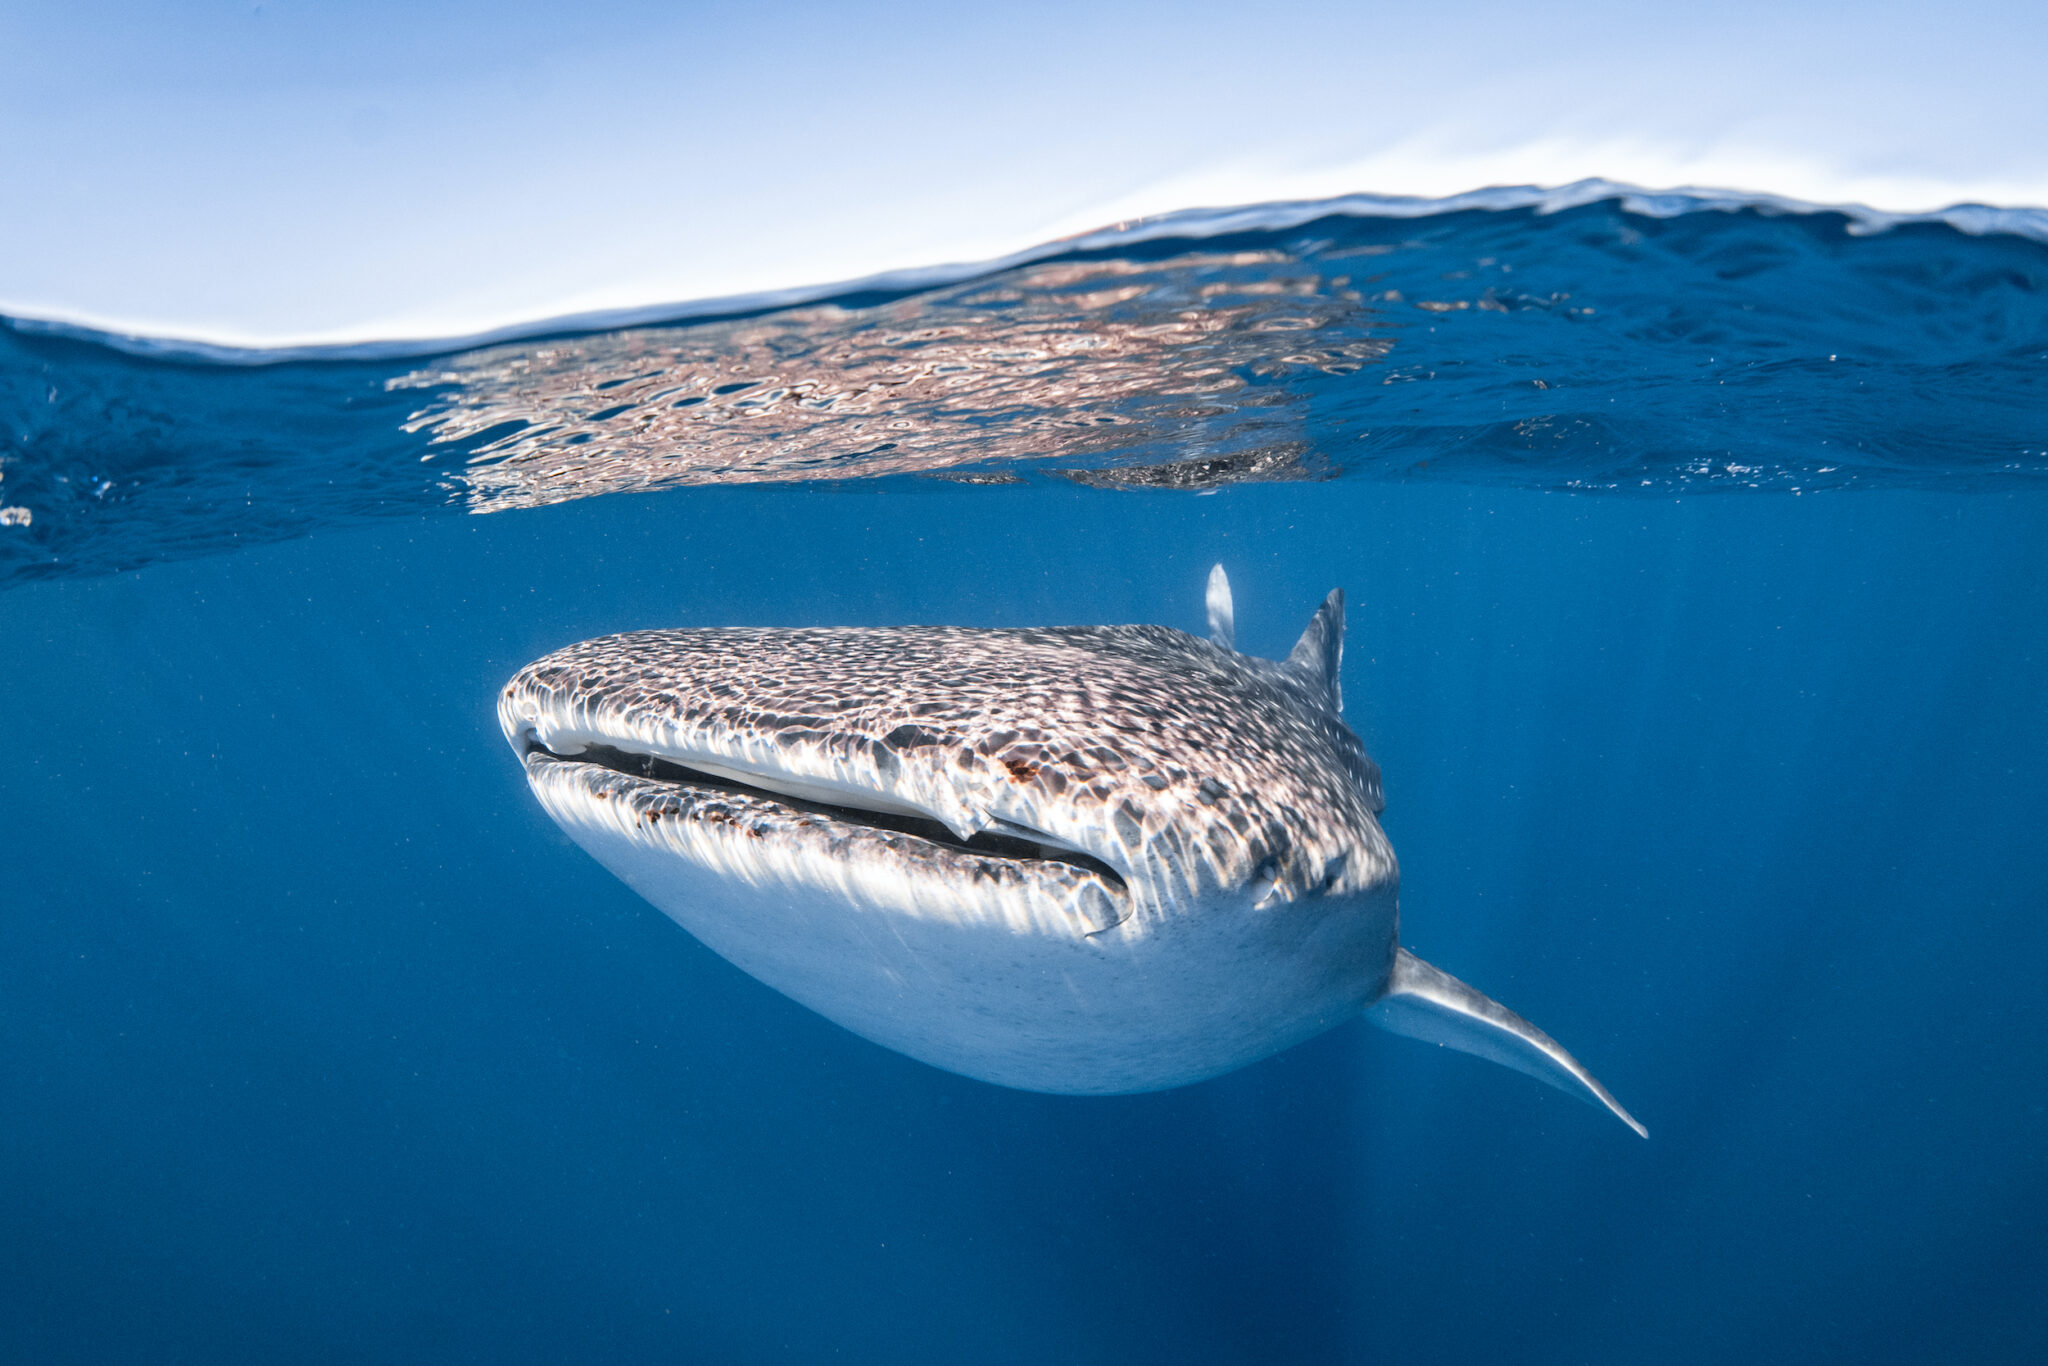 A whale shark cruising beneath the surface at Ningaloo Reef, Western Australia - a top destination for whale shark diving